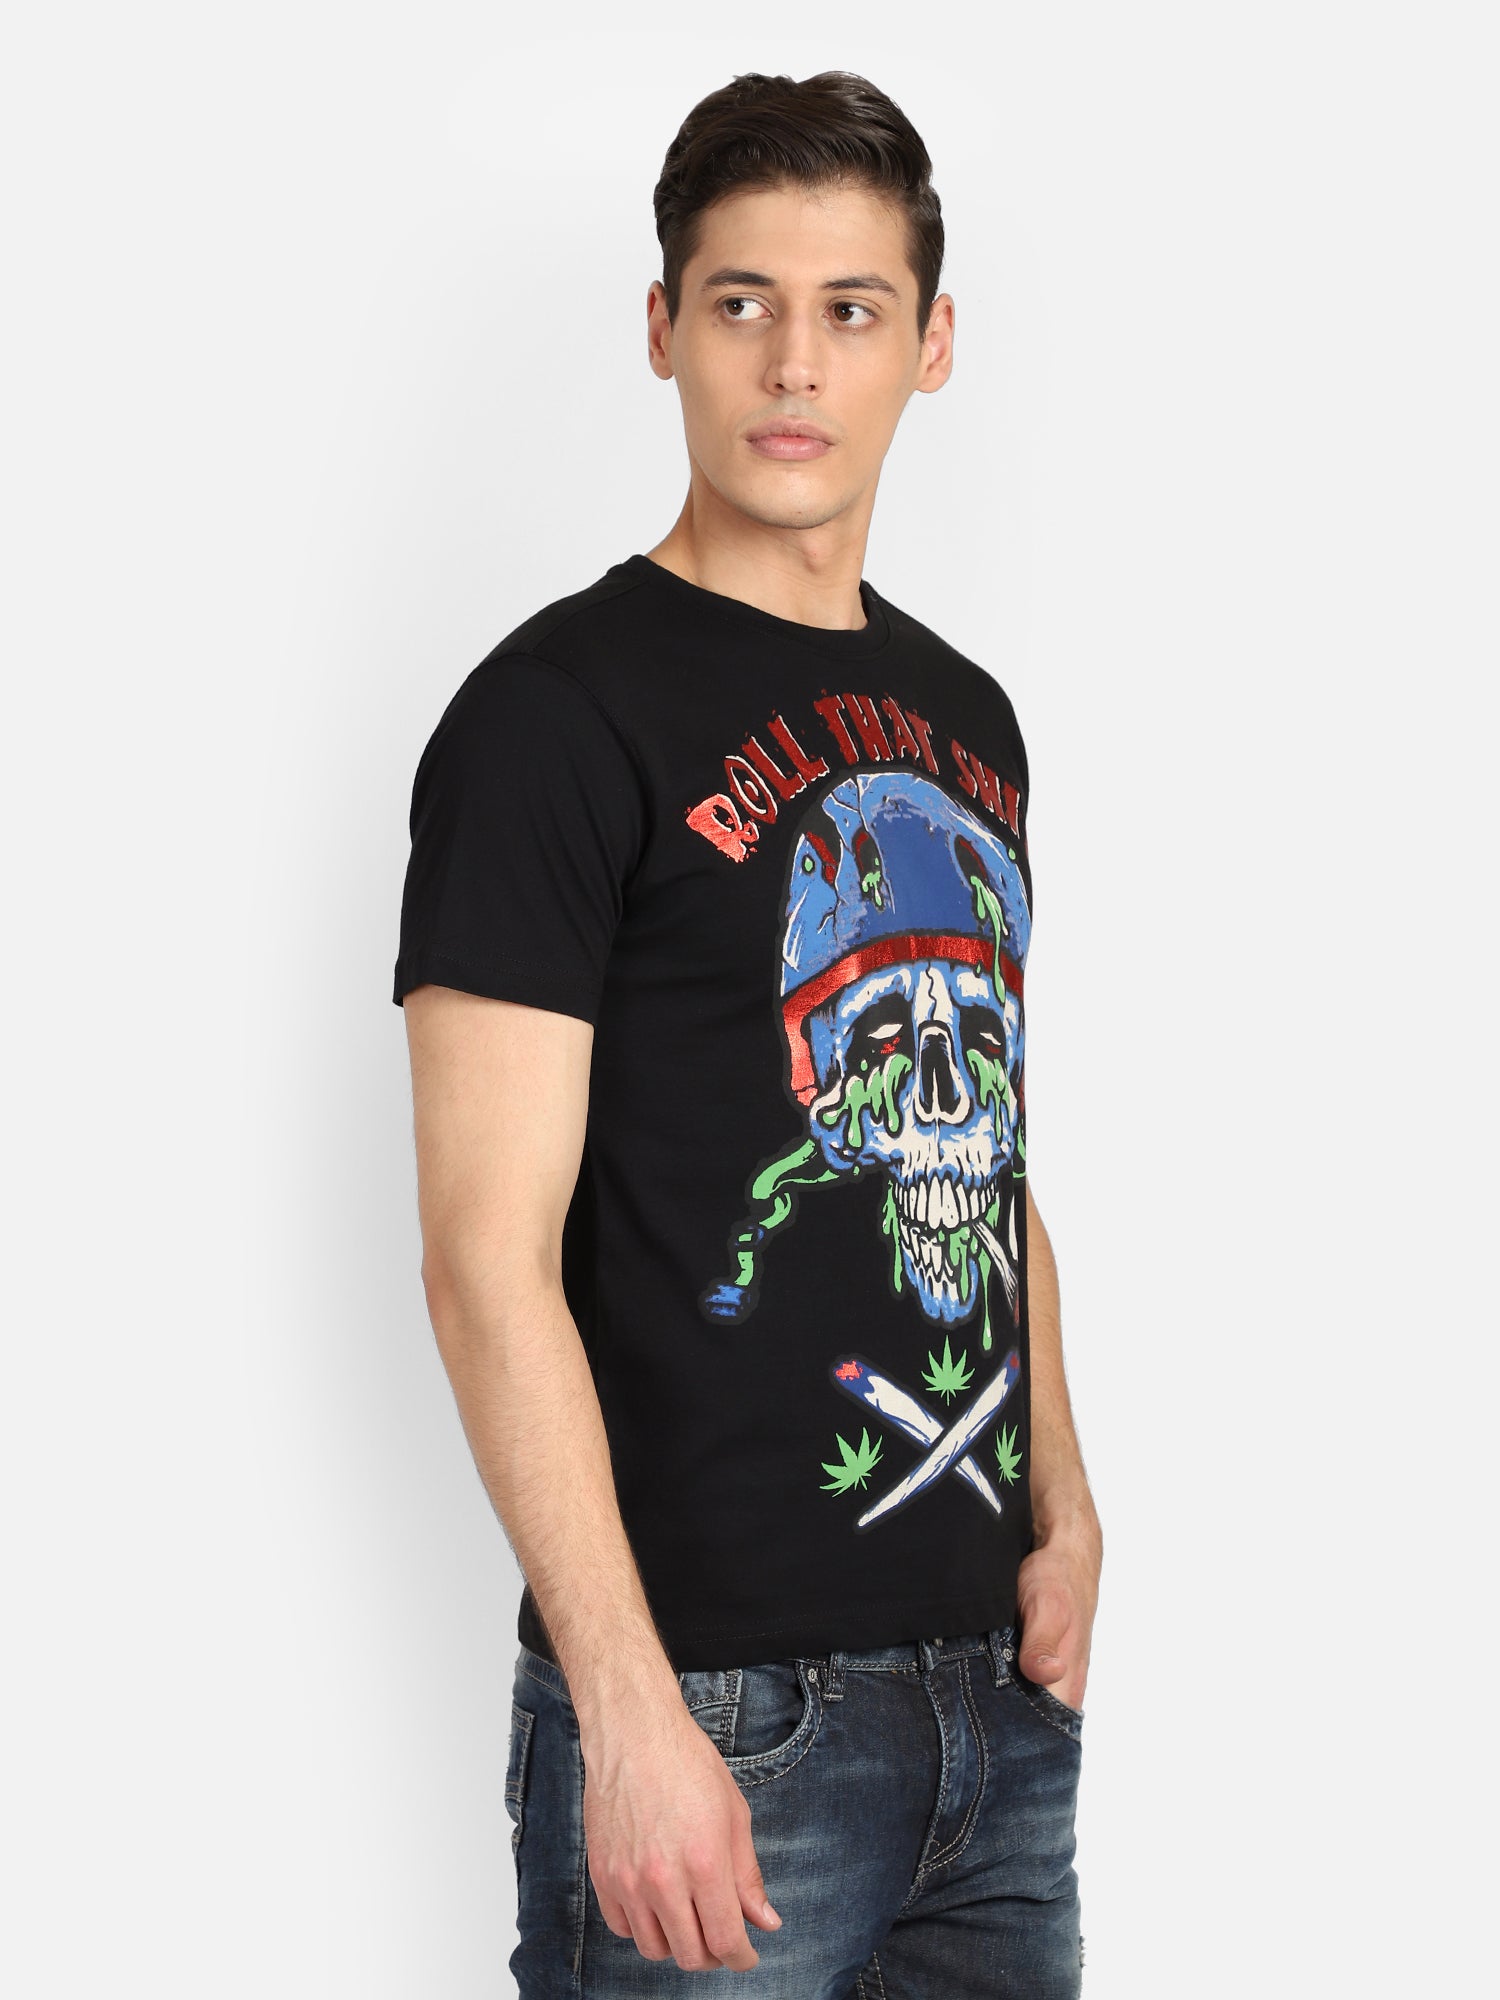 Punk ROLL-THAT-SHIT Weed printed T Shirt